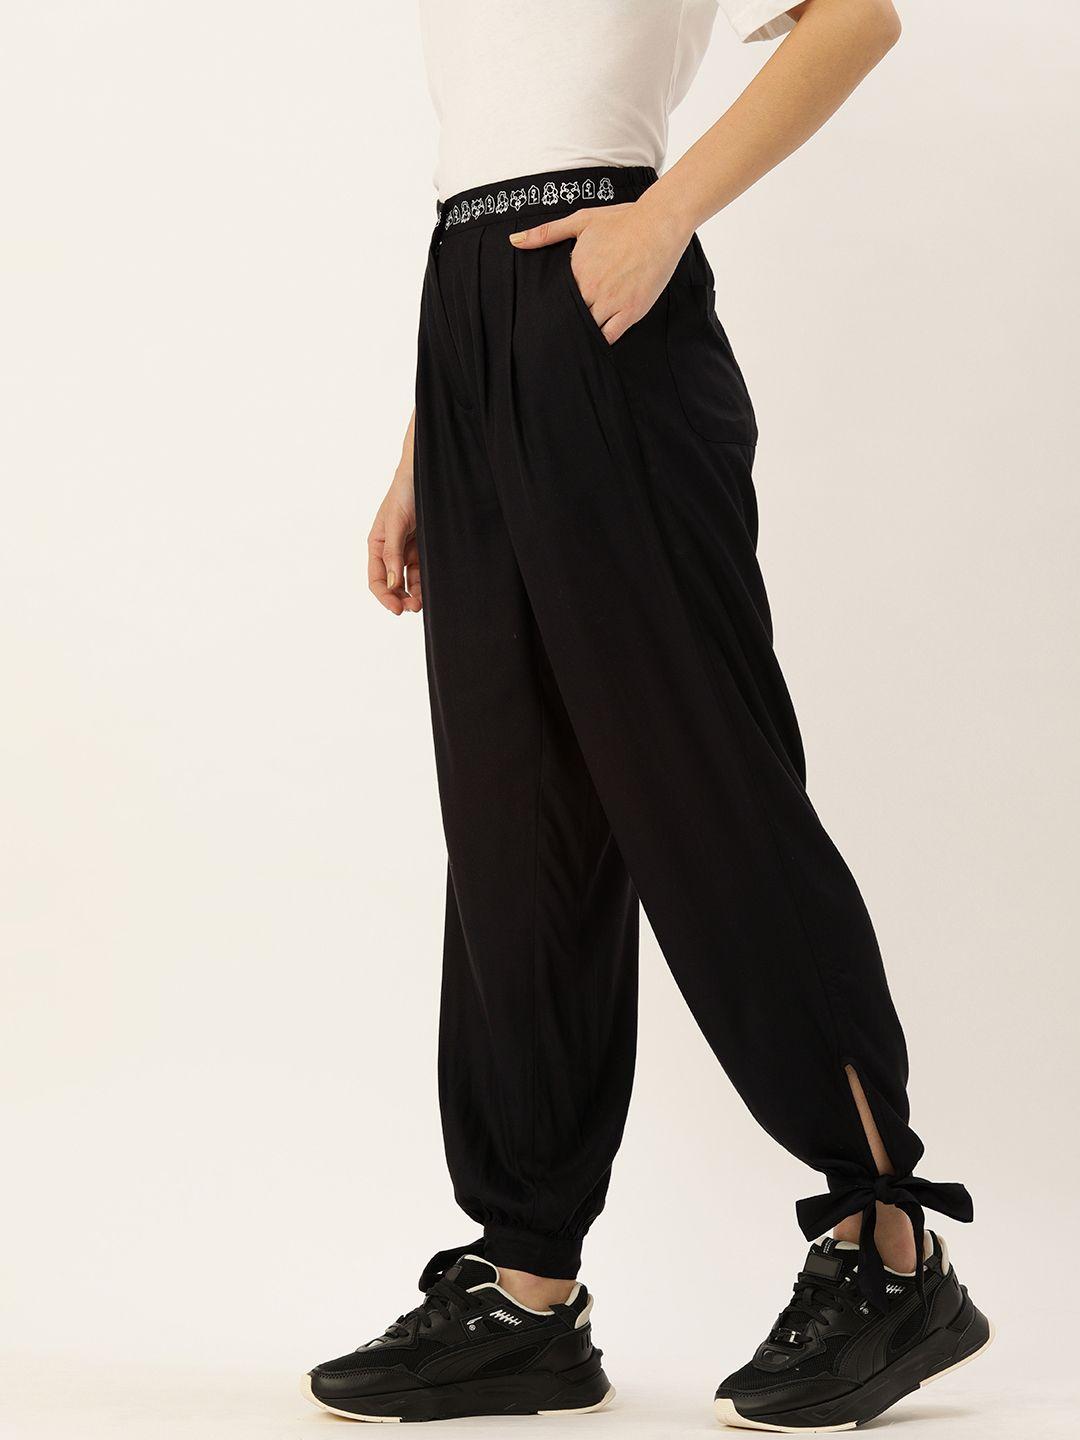 forever-21-women-black-solid-pleated-joggers-trousers-with-printed-waistband